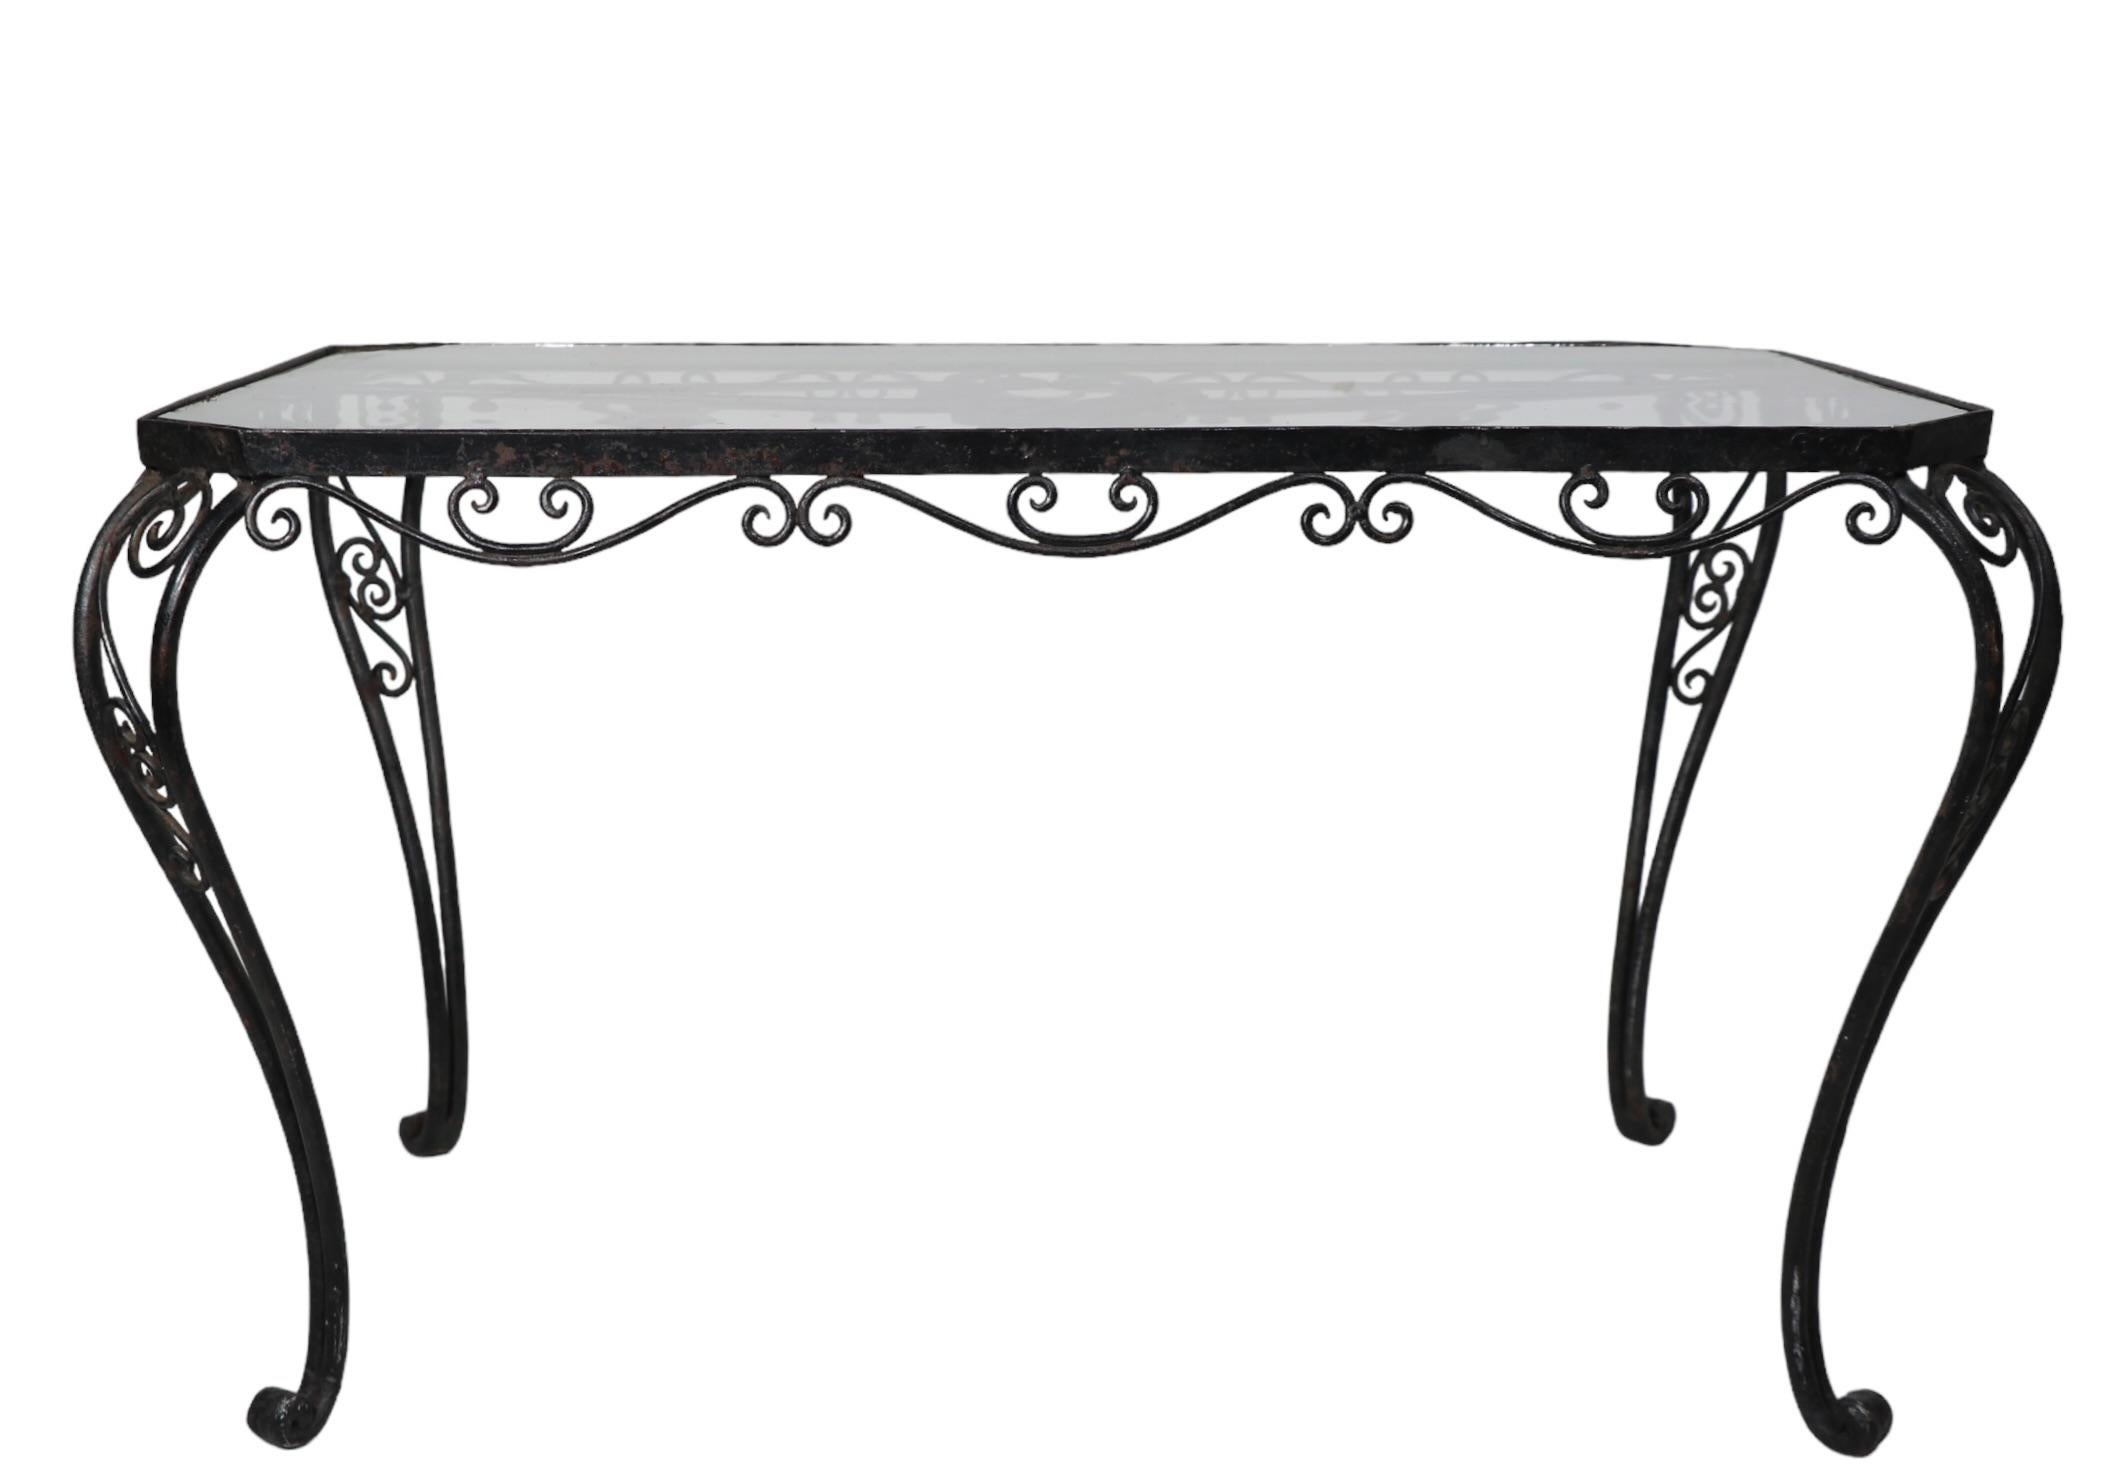 Wrought Iron Garden Patio Coffee Table poss. Salterini or Woodard In Good Condition For Sale In New York, NY